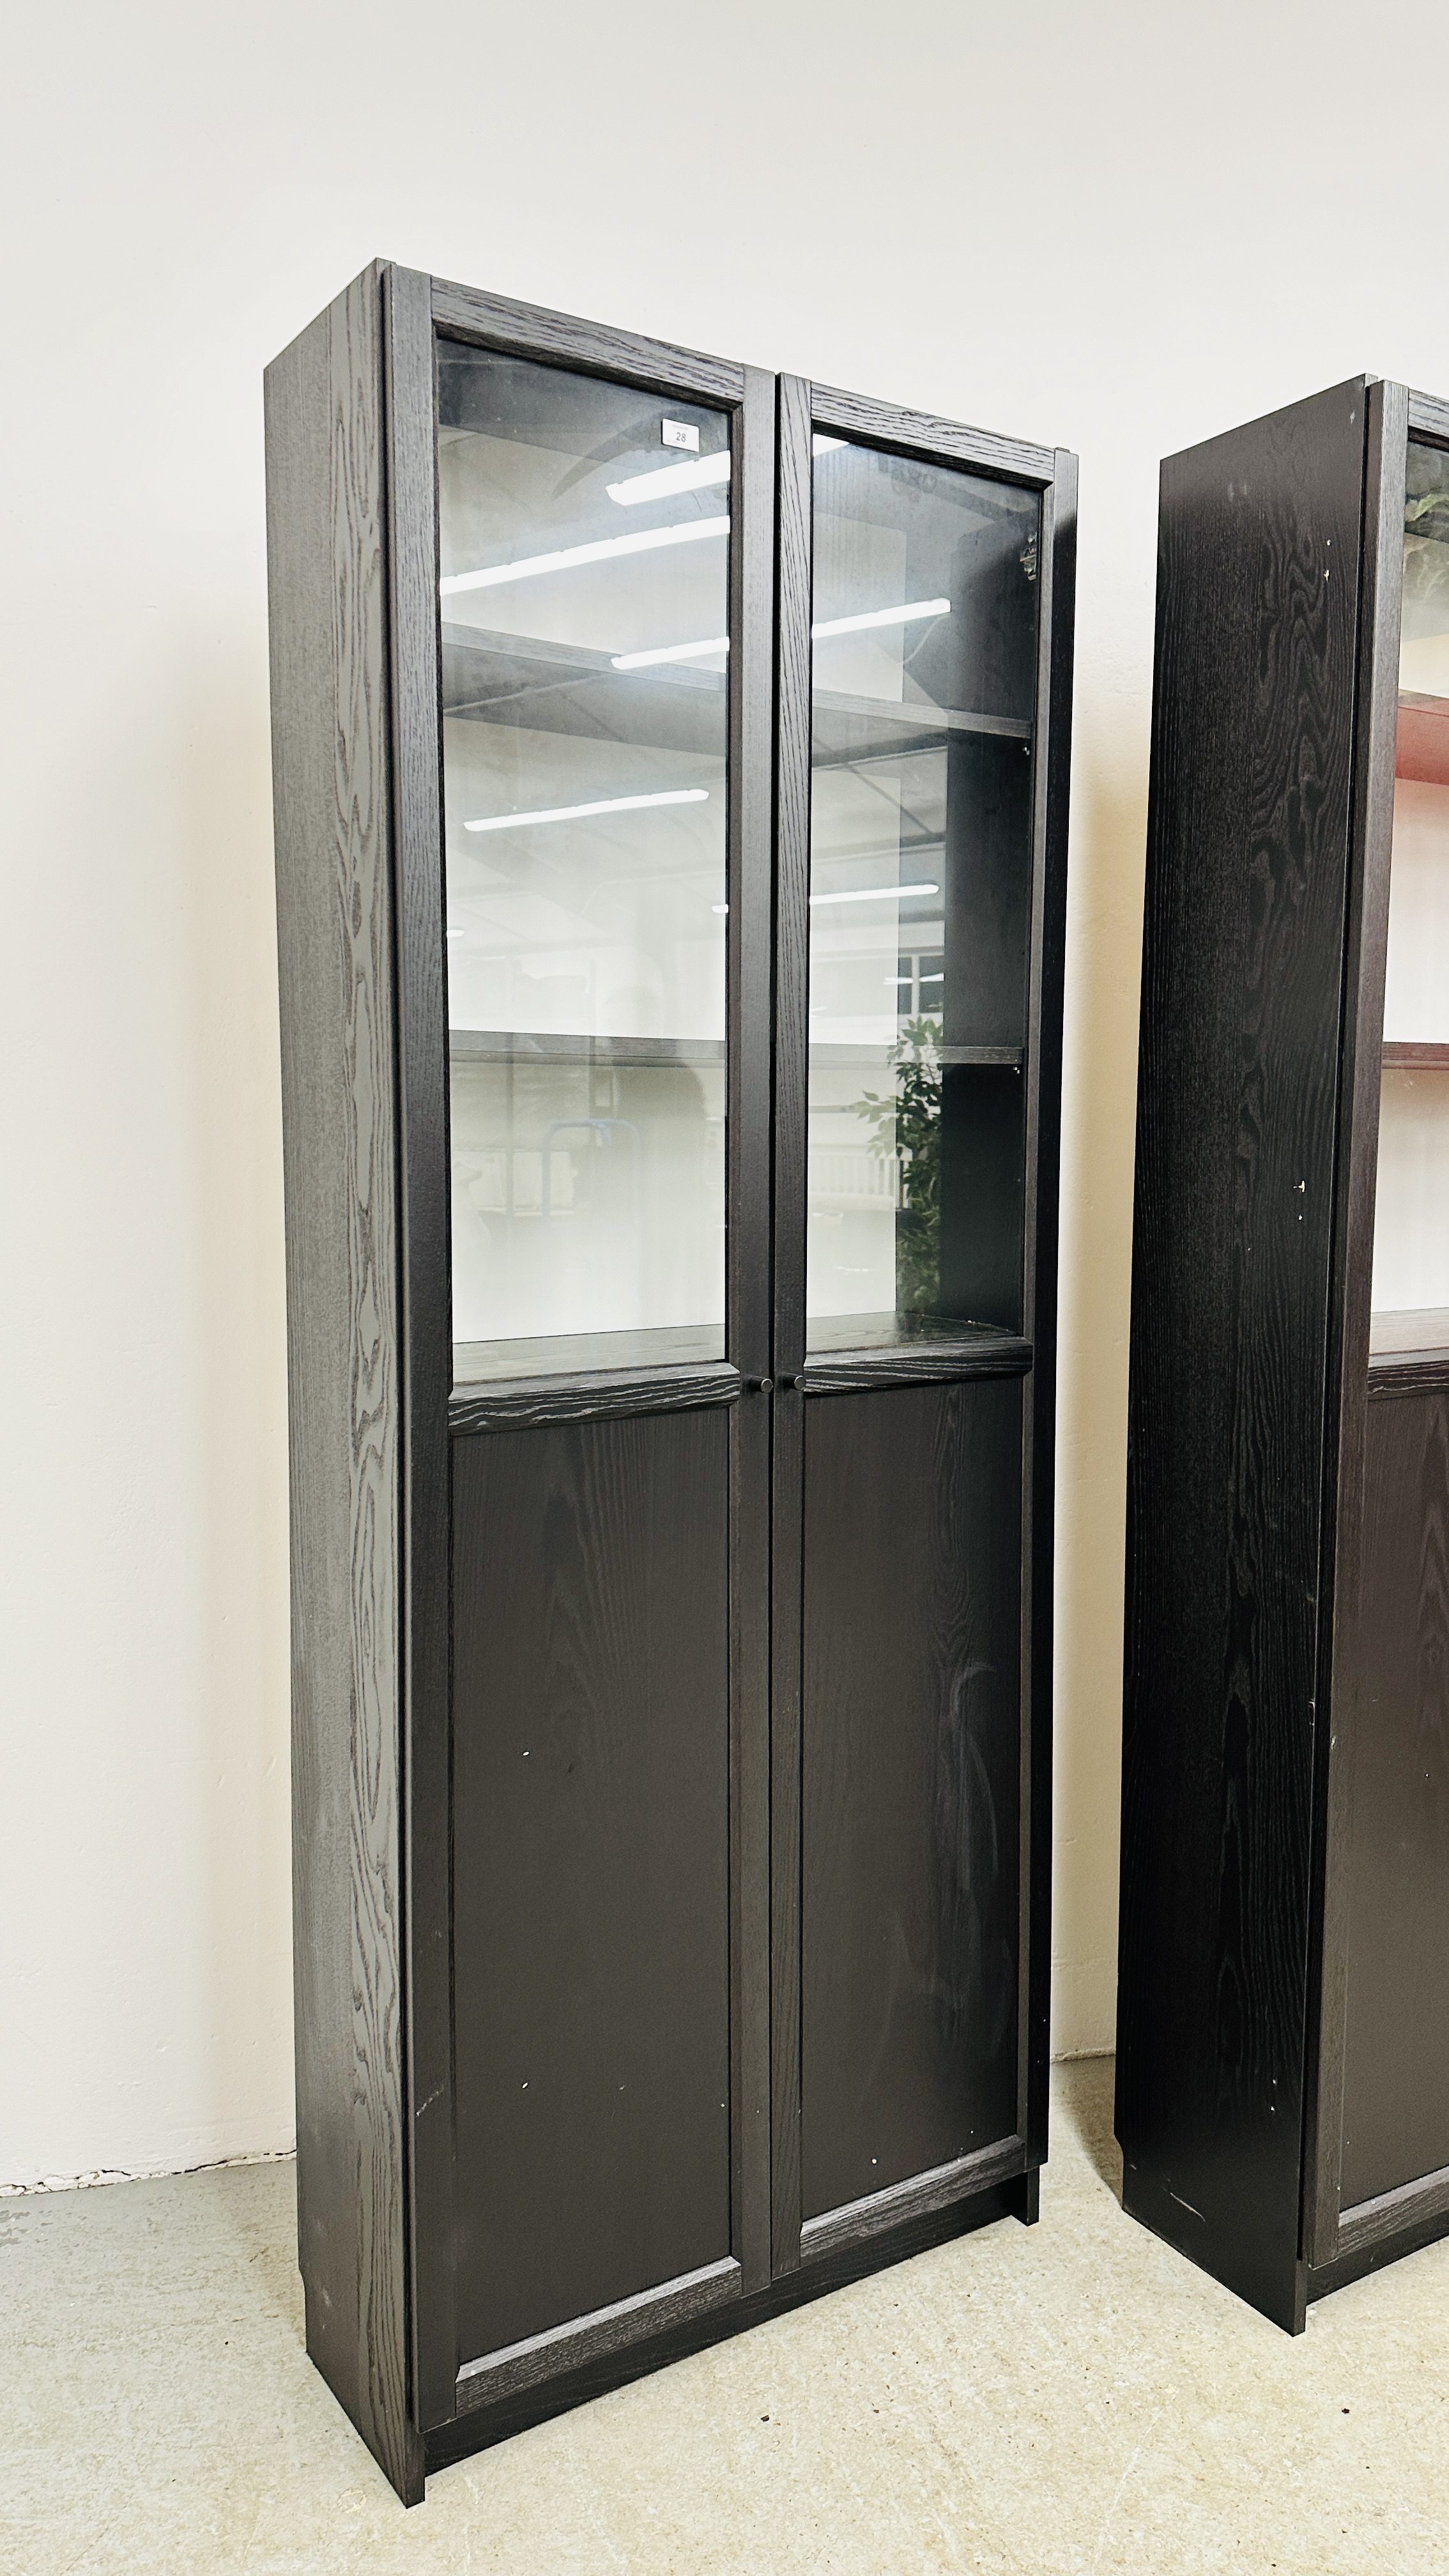 2 X MODERN BLACK ASH EFFECT FINISH FULL HEIGHT WALL CABINETS WITH GLAZED TOPS EACH W 80CM, D 30CM, - Image 4 of 8